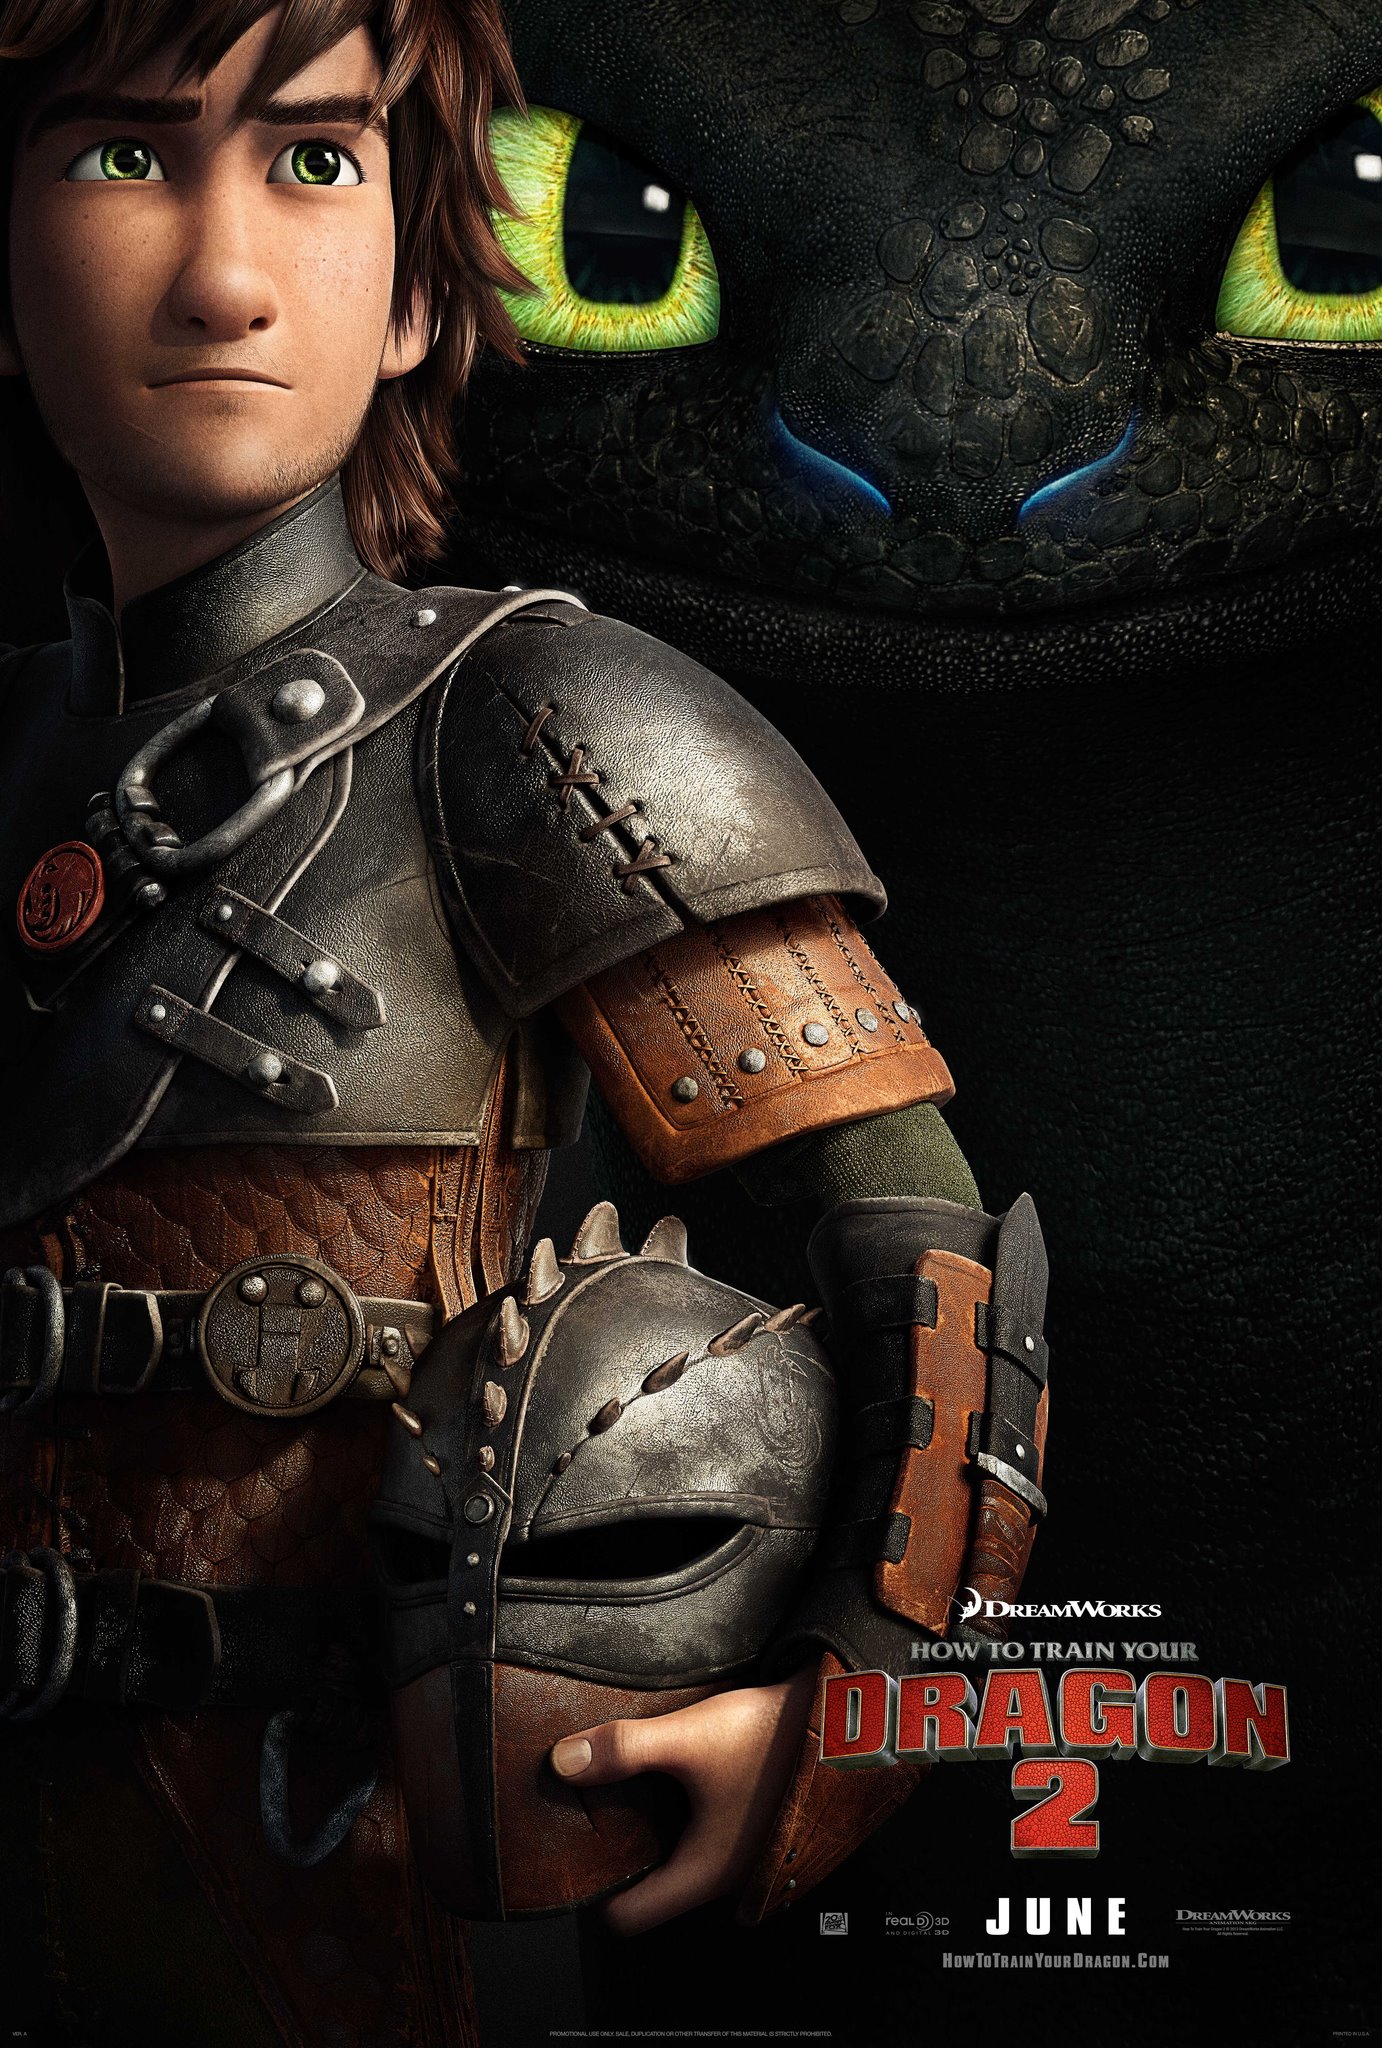 How To Train Your Dragon 2 #4